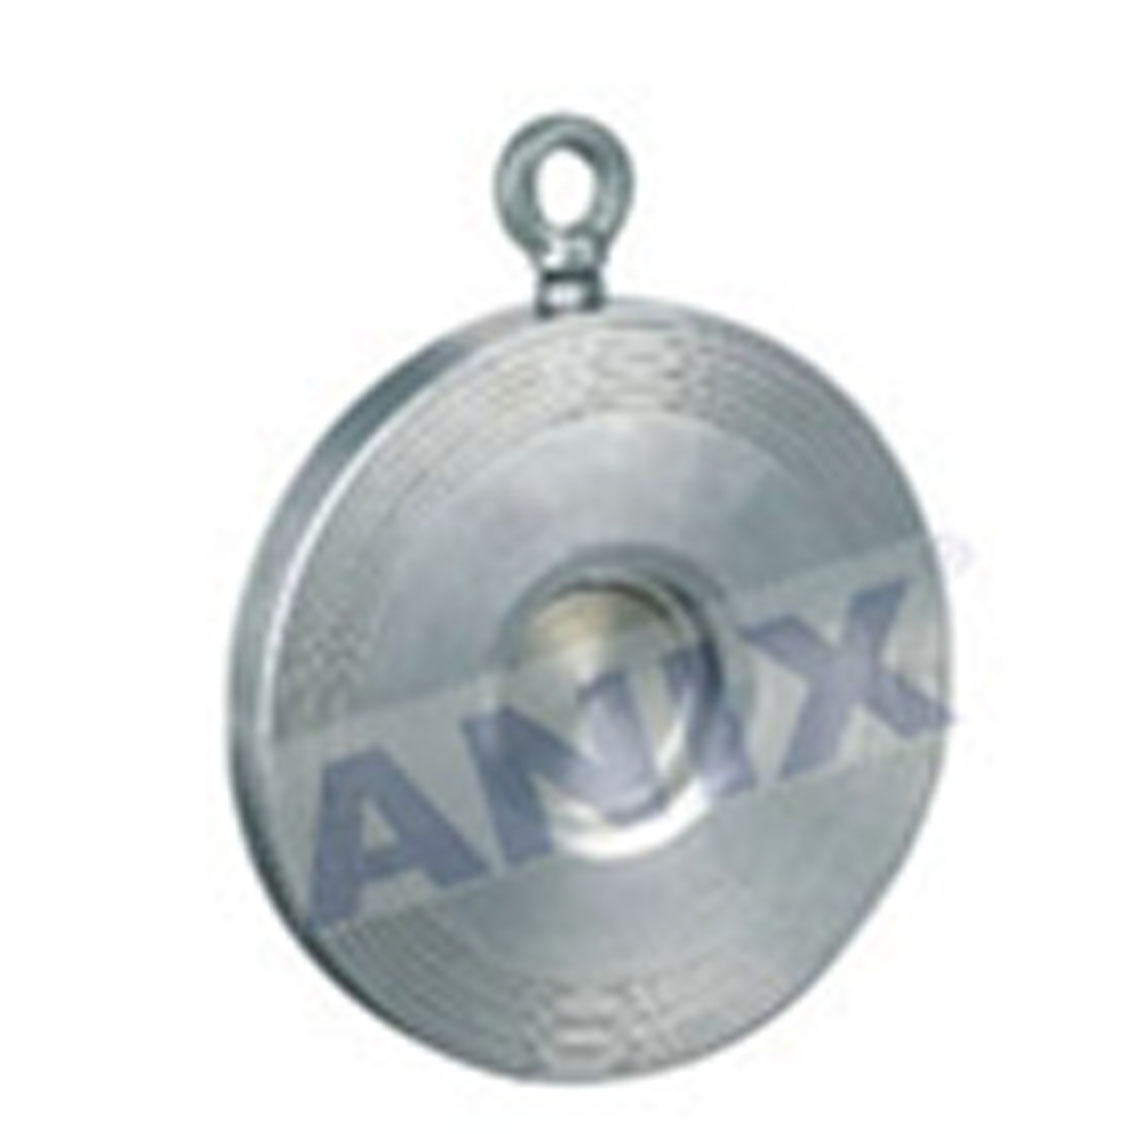 H74 SWING TYPE SINGLE DISC WAFER CHECK VALVE